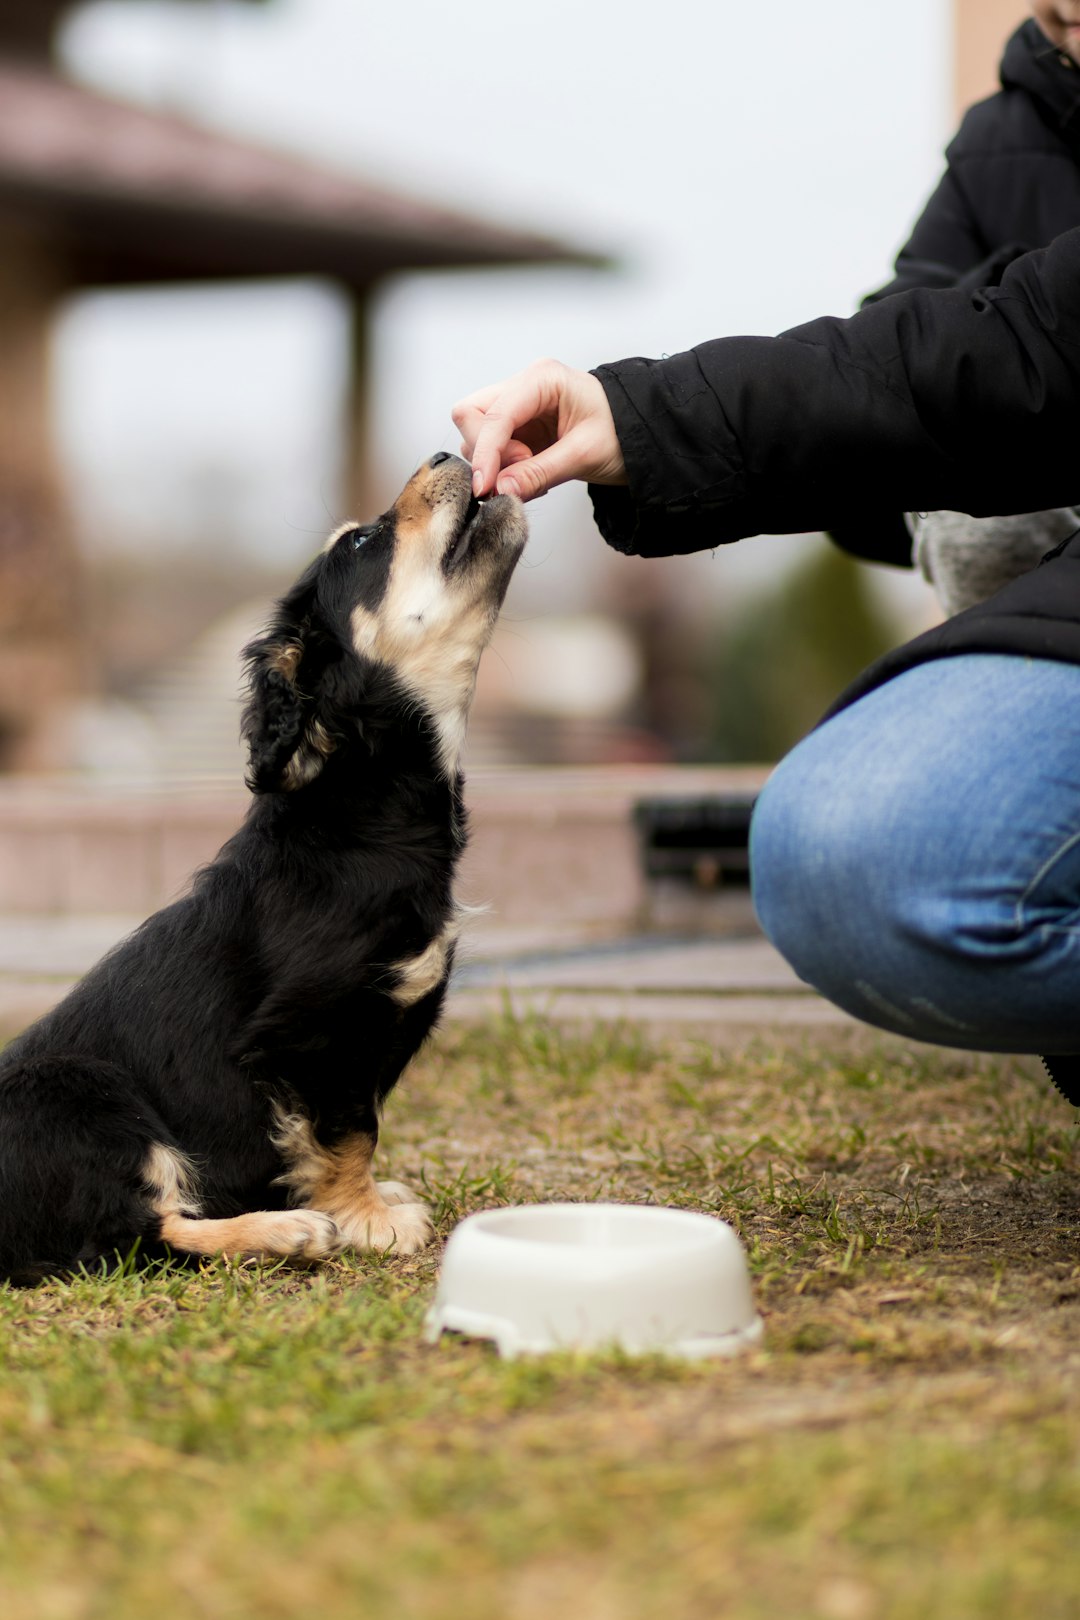 Do Dogs Know When to Stop Eating?